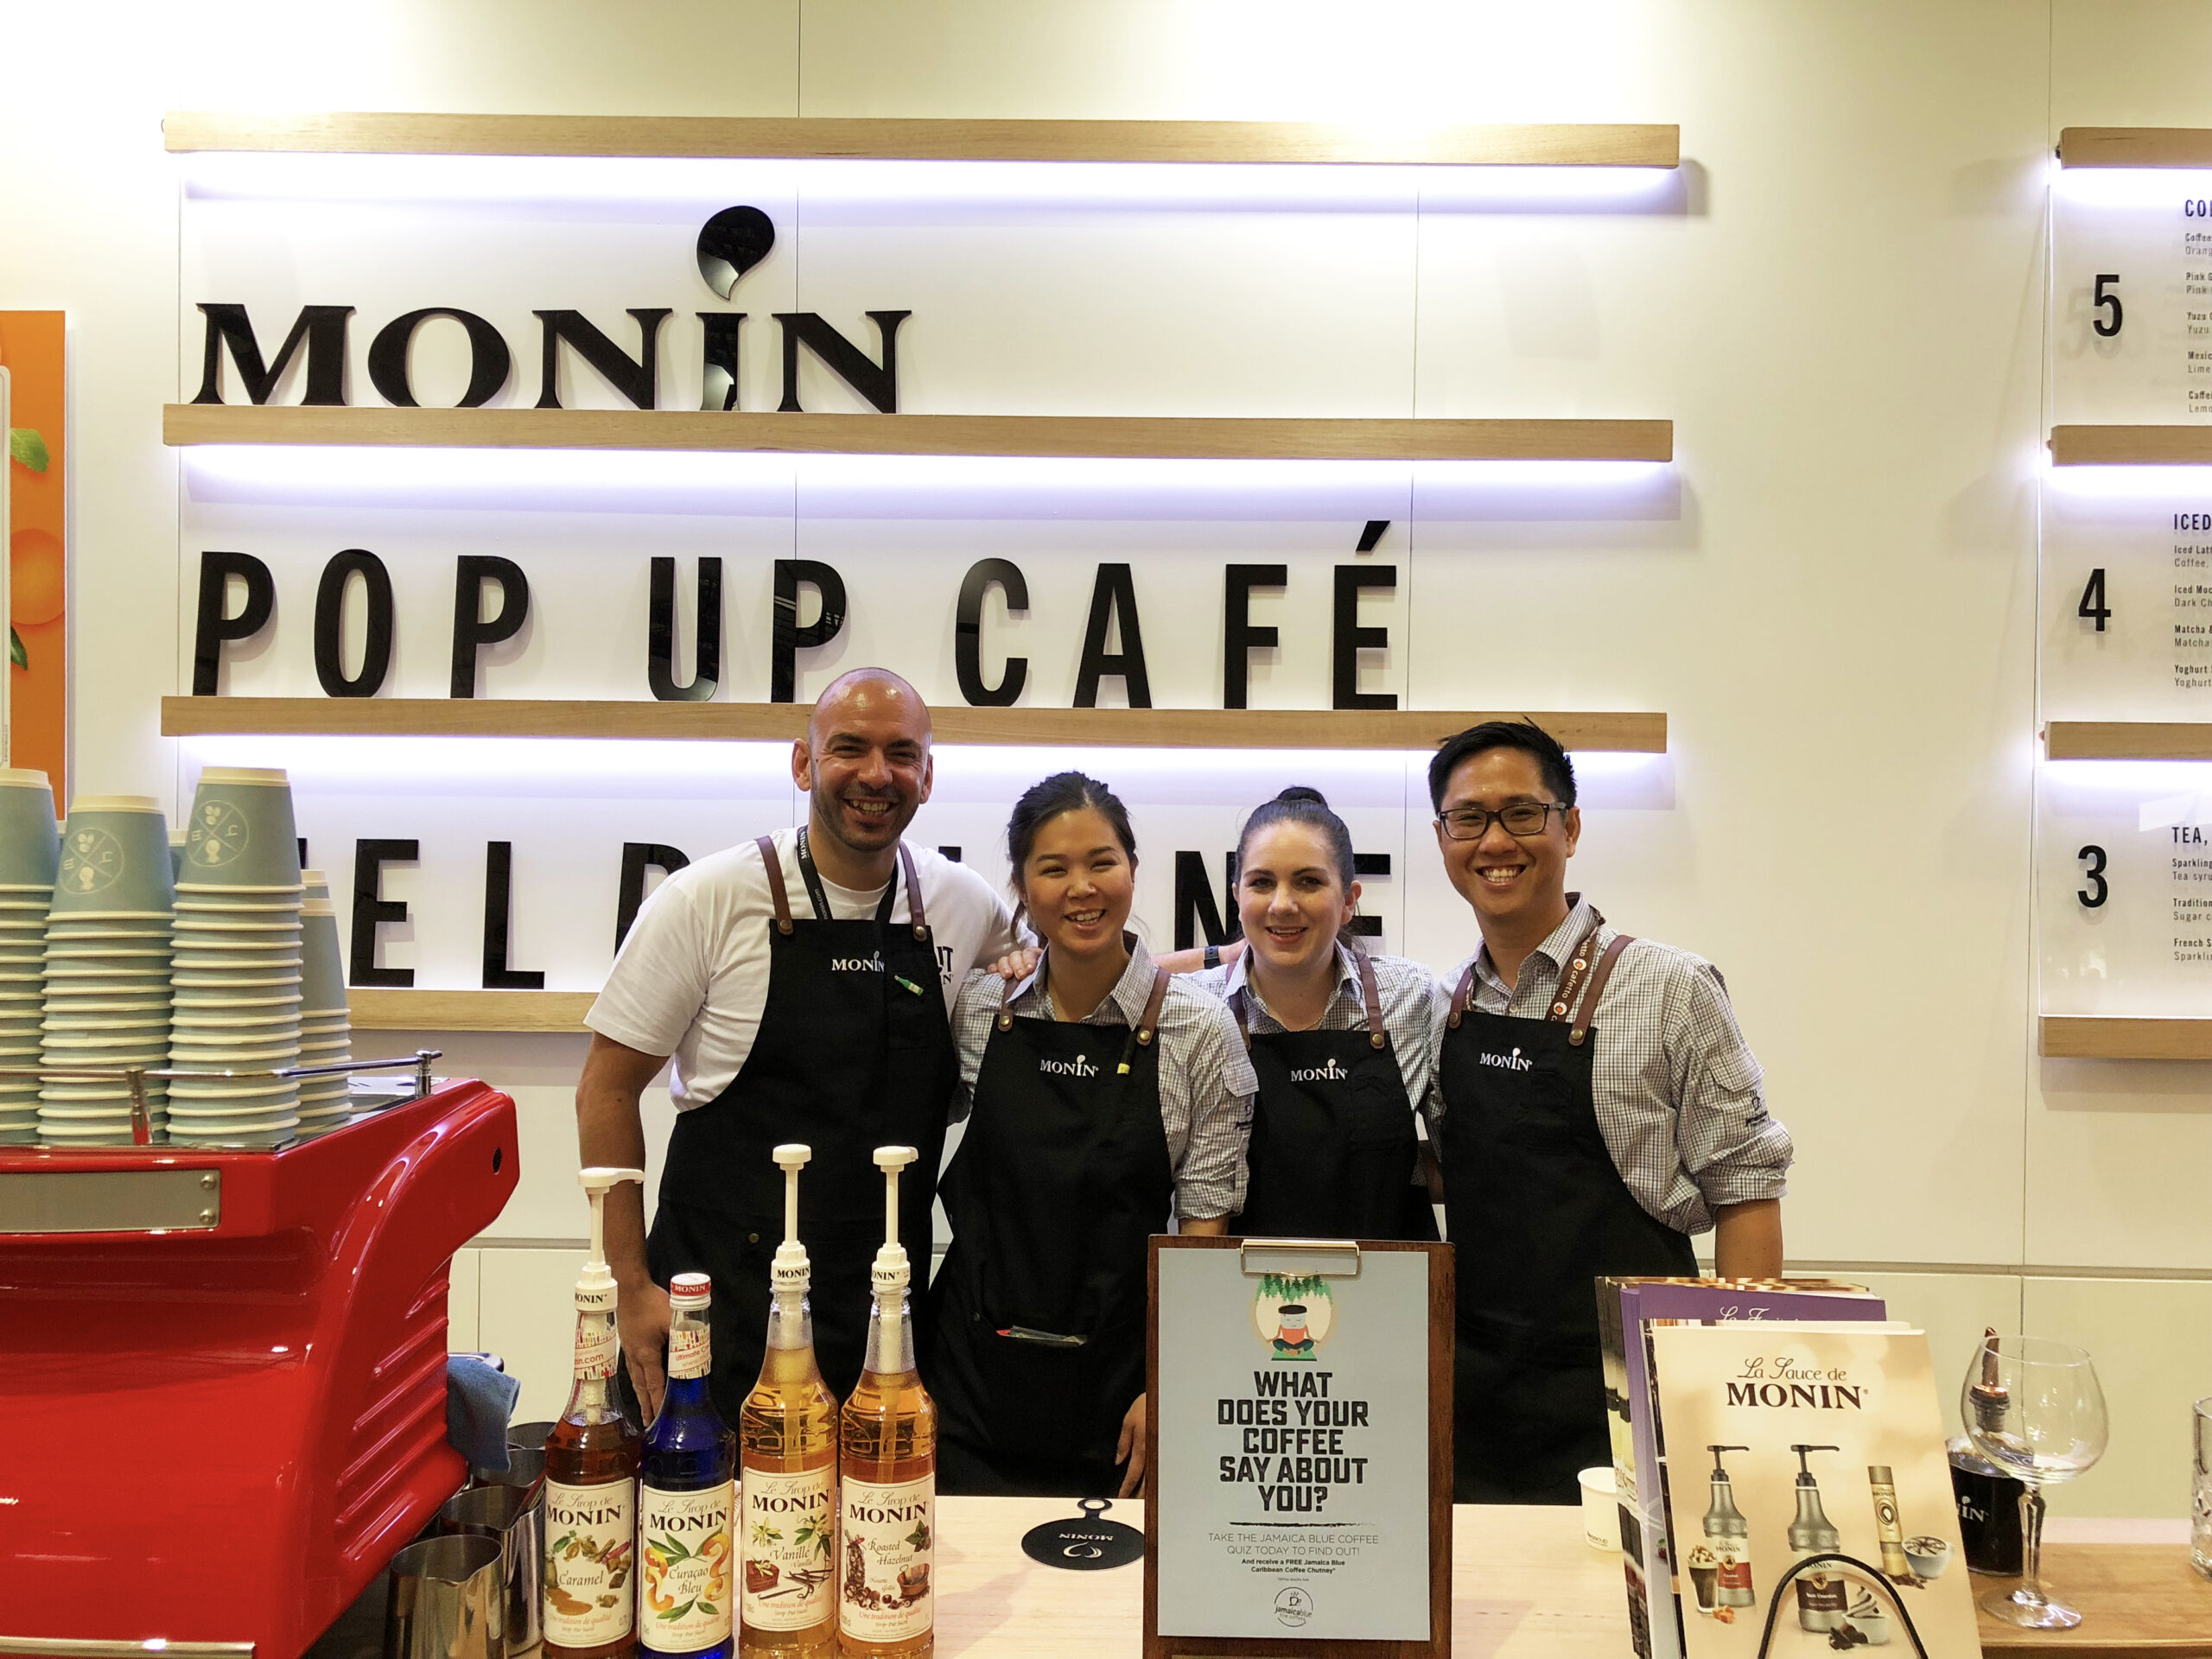 Jamaica Blue and MONIN: Launch of coffee personality quiz at the Melbourne International Coffee Expo 2018